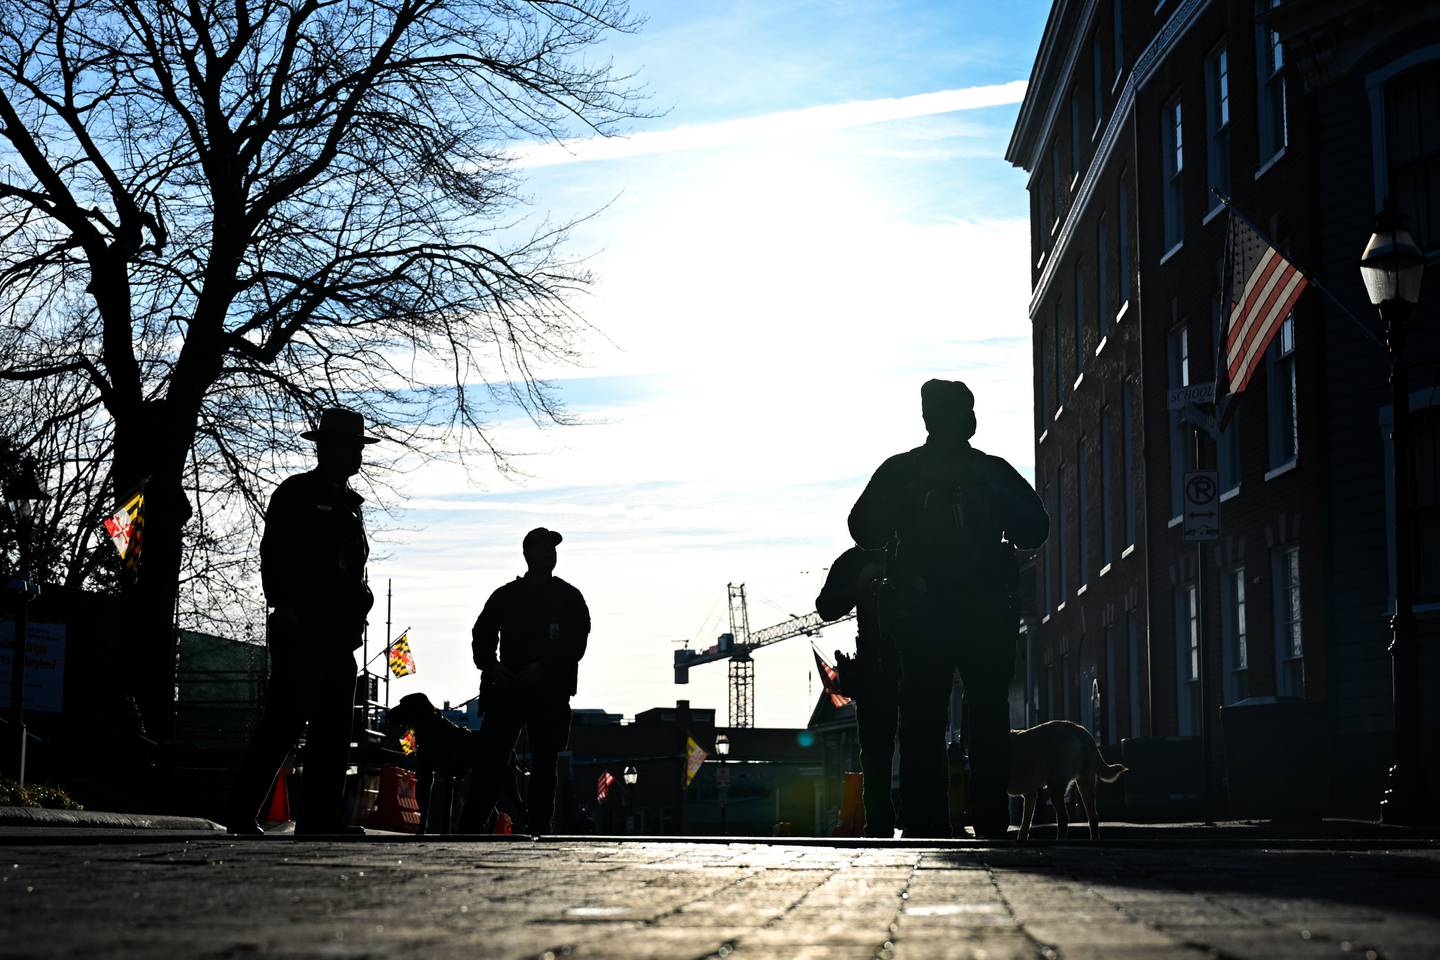 Members of the Maryland State Police stand guard before the swearing in ceremony of Wes Moore, Wednesday, Jan. 18, 2023, in Annapolis.